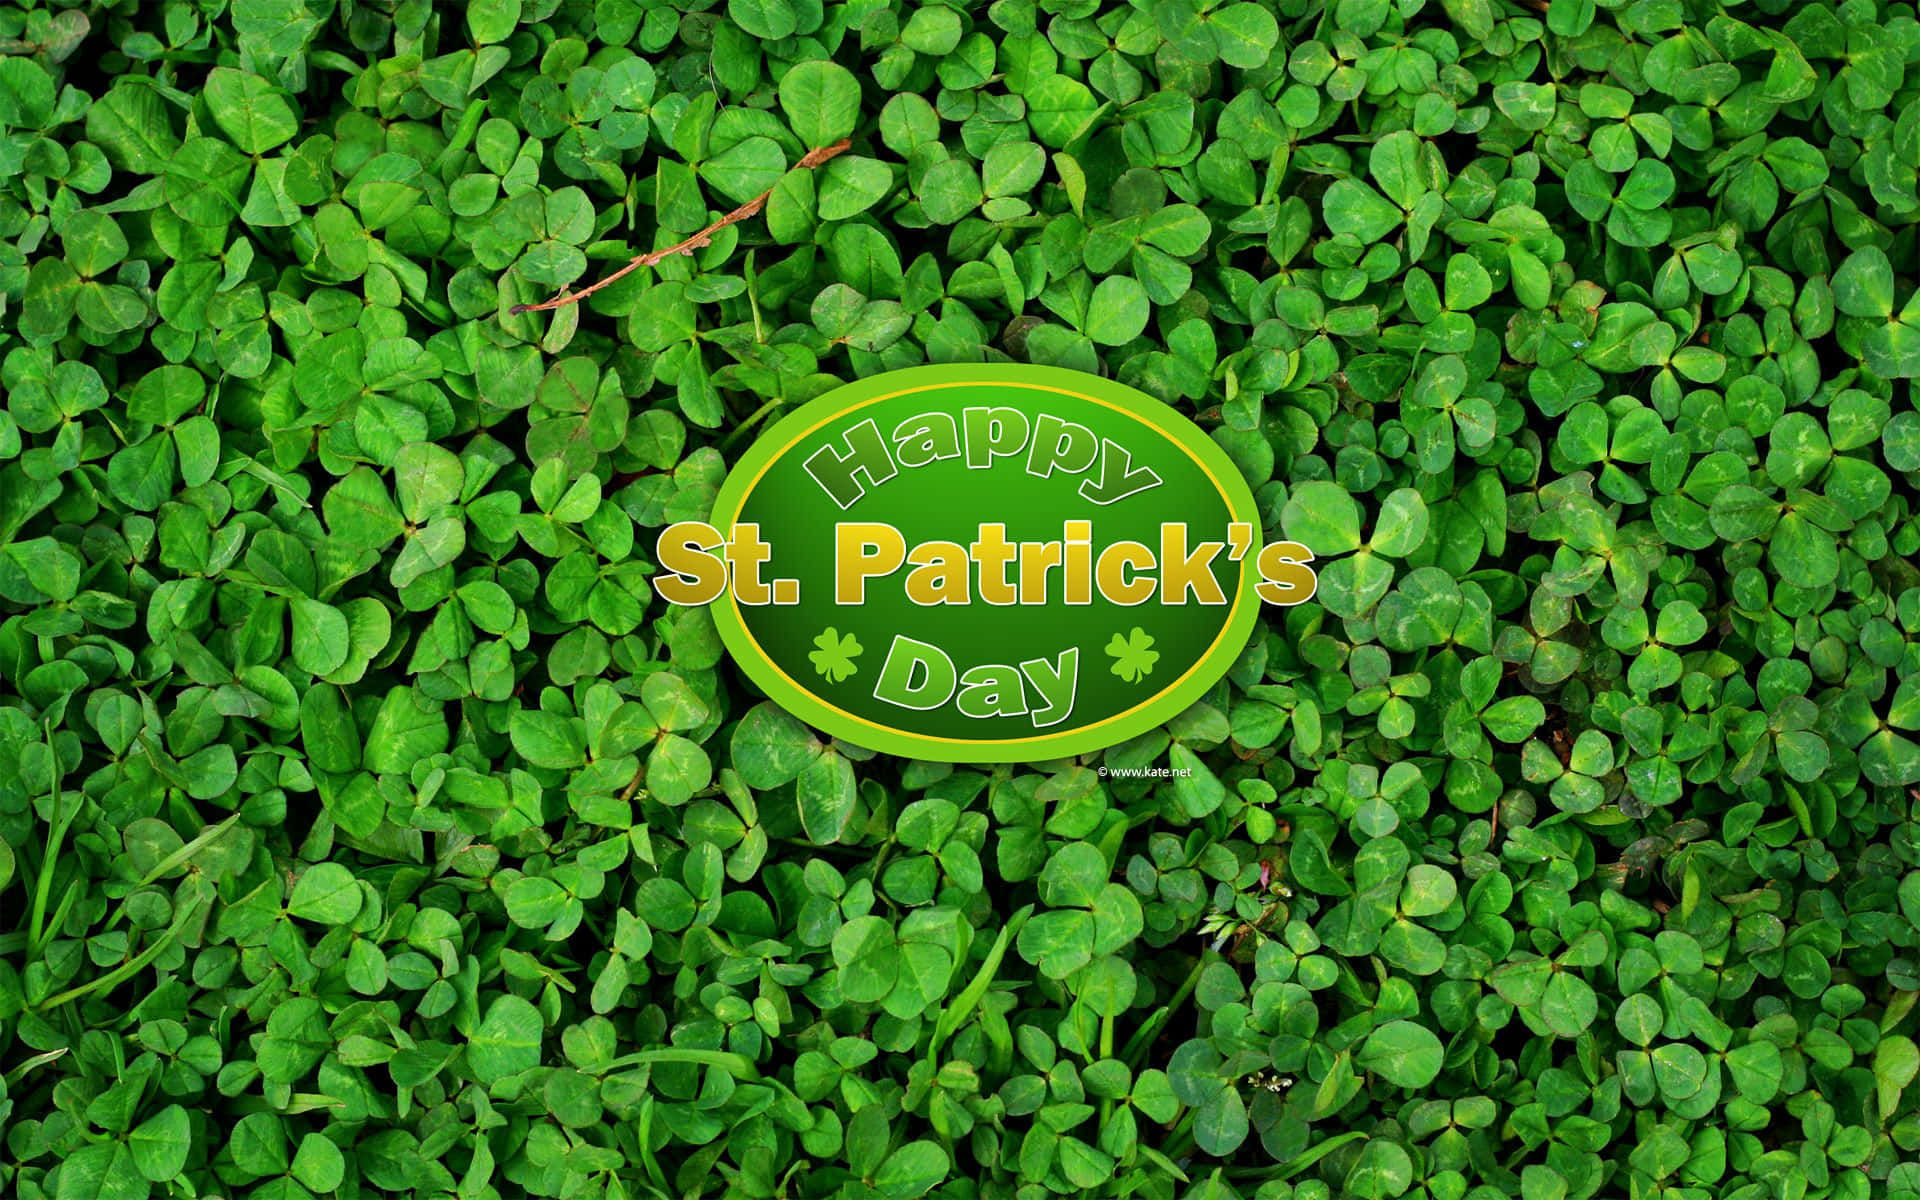 Get Lucky with this Pretty Shamrock Wallpaper